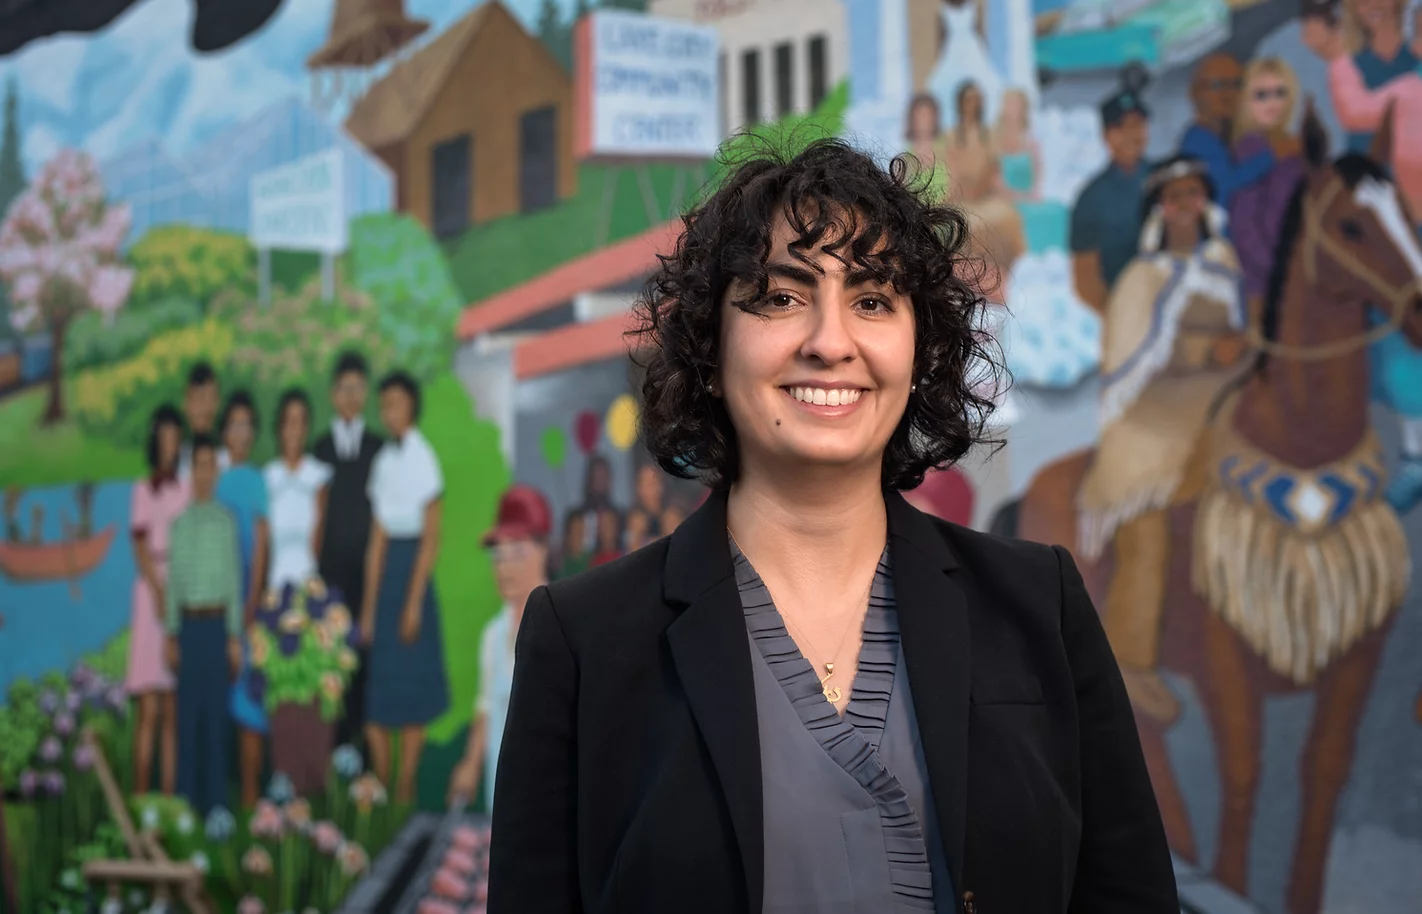 Photo of Darya Farivar, standing in front of a street mural featuring families of different communities.